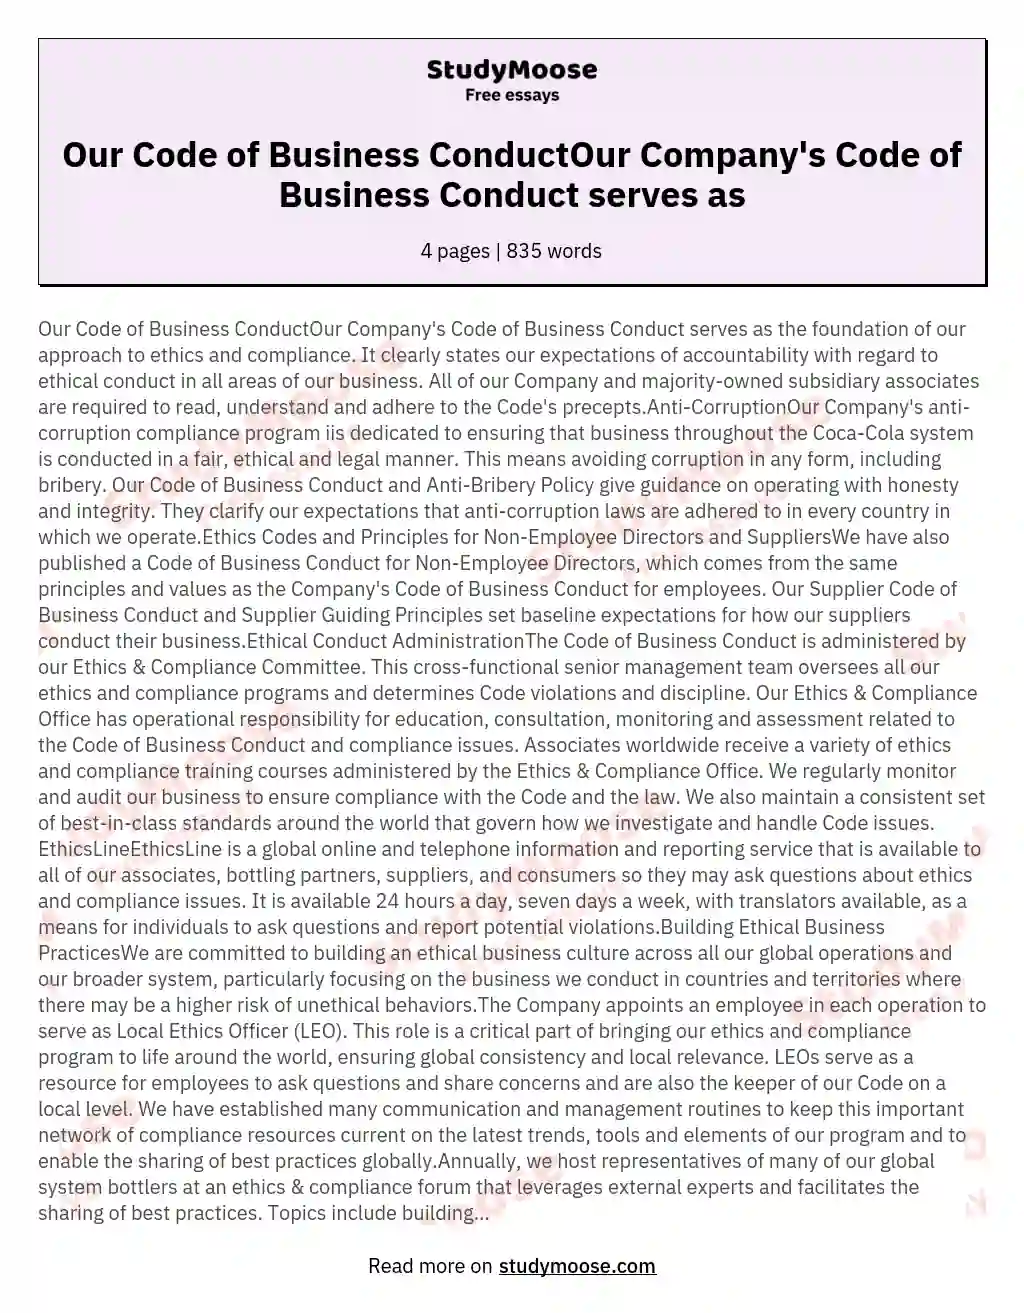 Our Code of Business ConductOur Company's Code of Business Conduct serves as